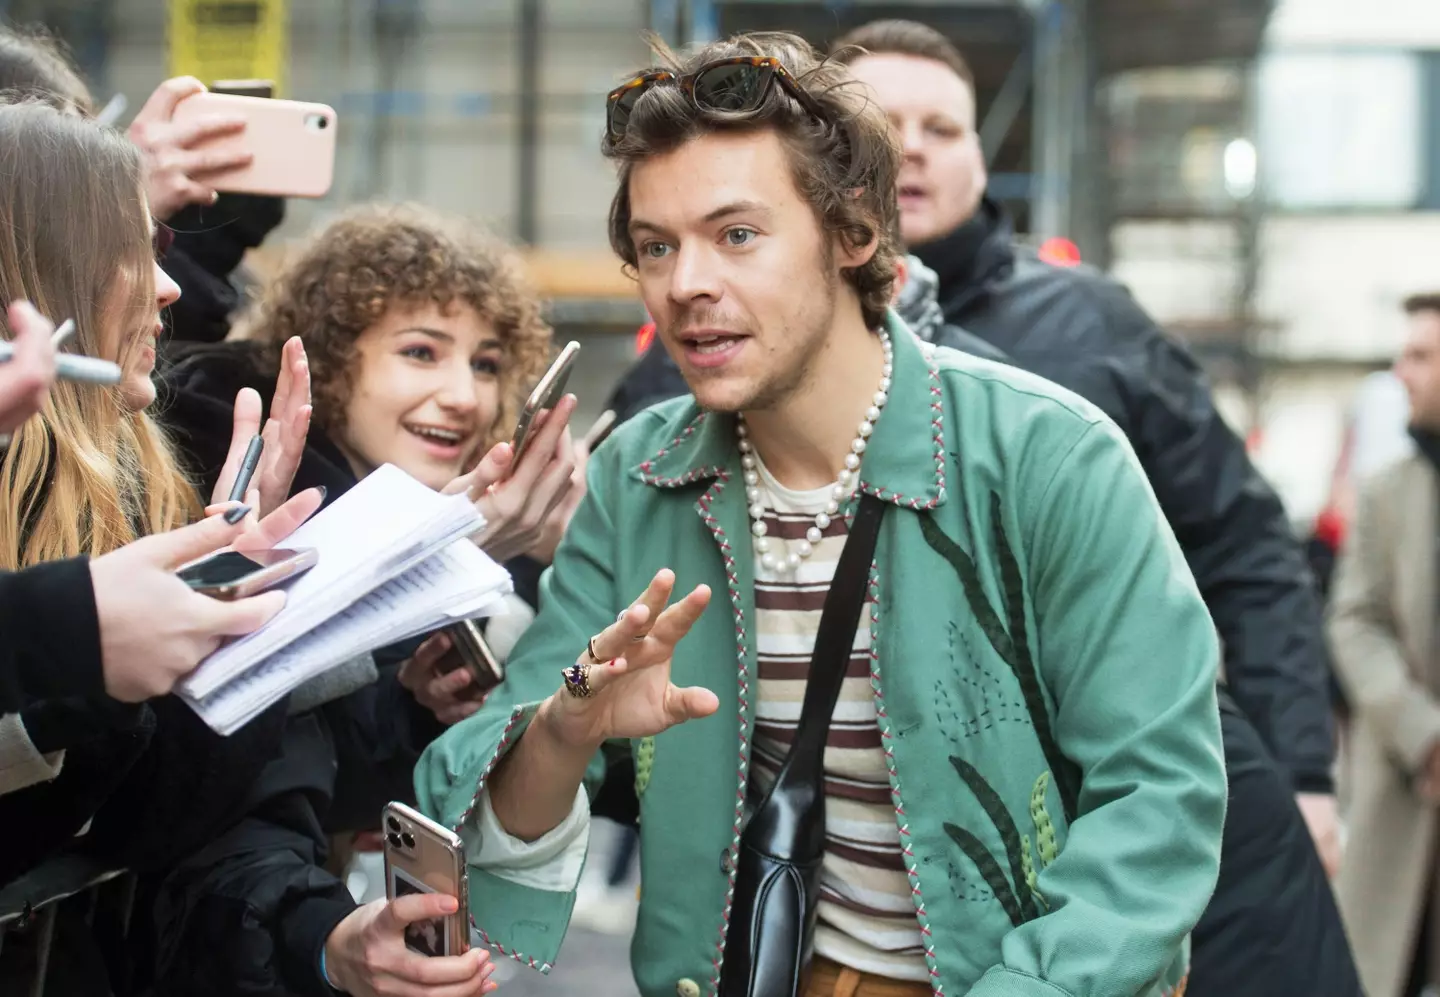 Harry Styles speaks with fans as he leaves the BBC Radio studios in London, after an appearance on Radio 2's The Zoe Ball Breakfast Show.